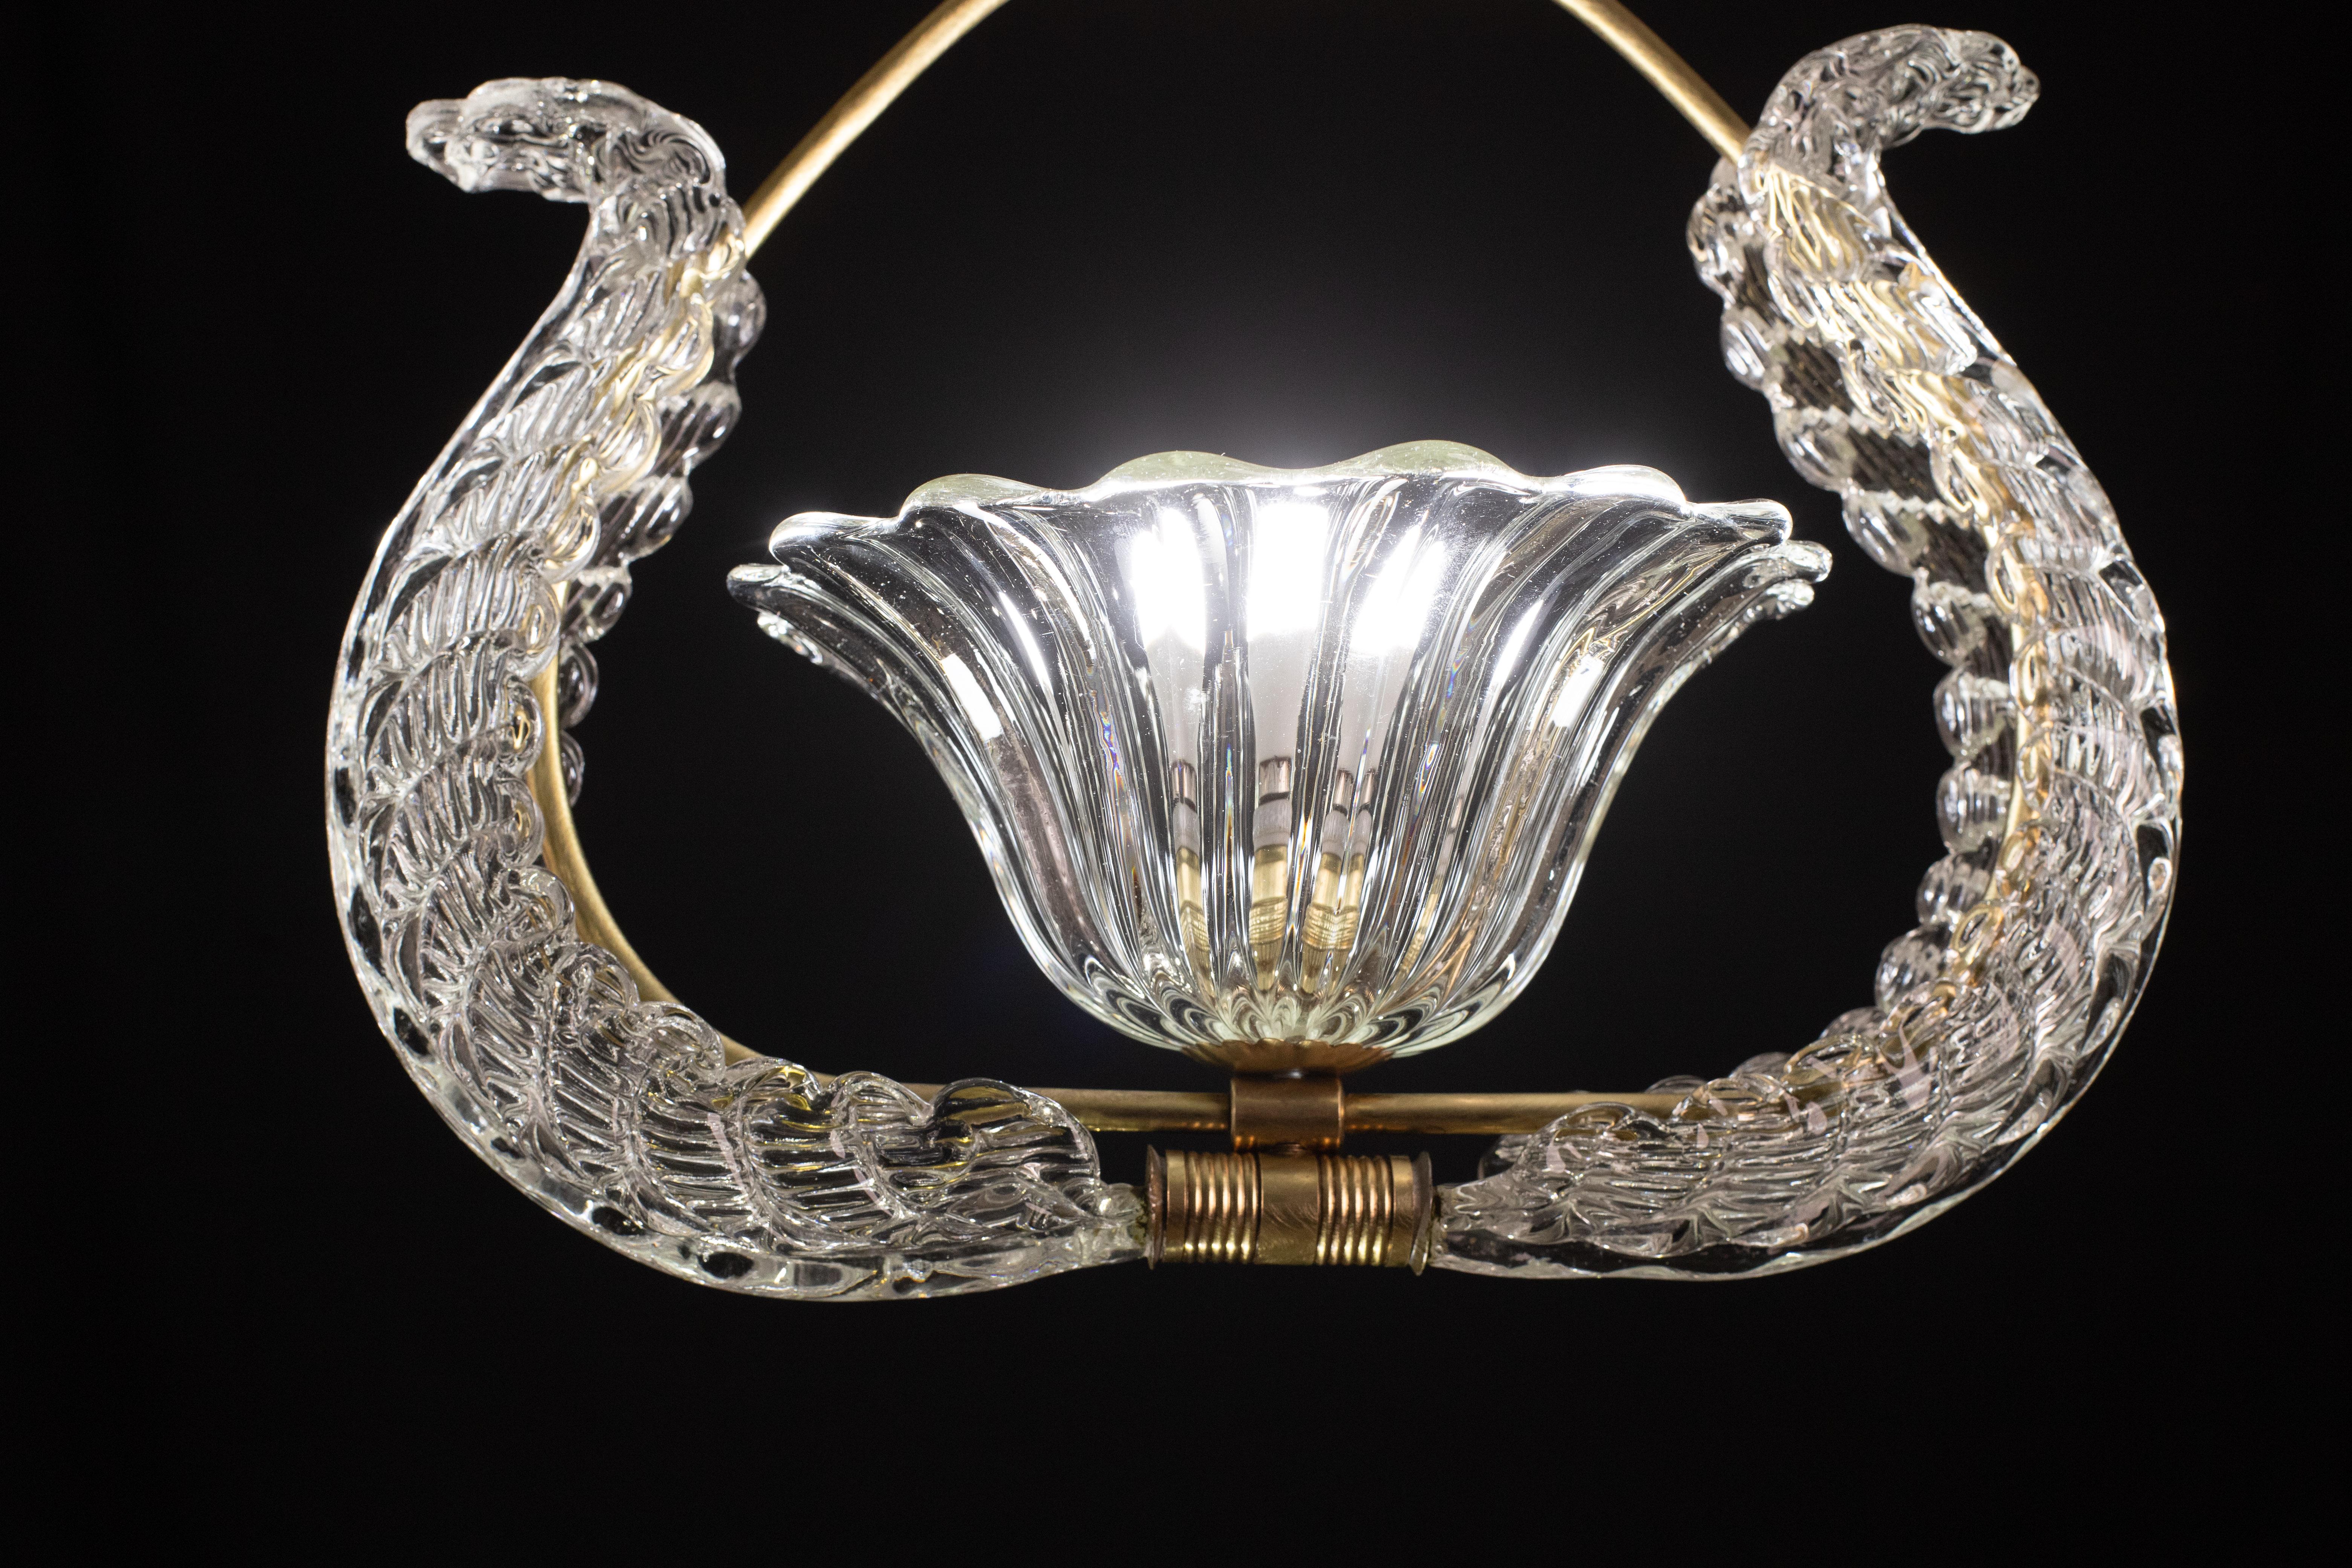 Murano Glass Charming Art Decò Barovier and Toso Chandelier, 1940s For Sale